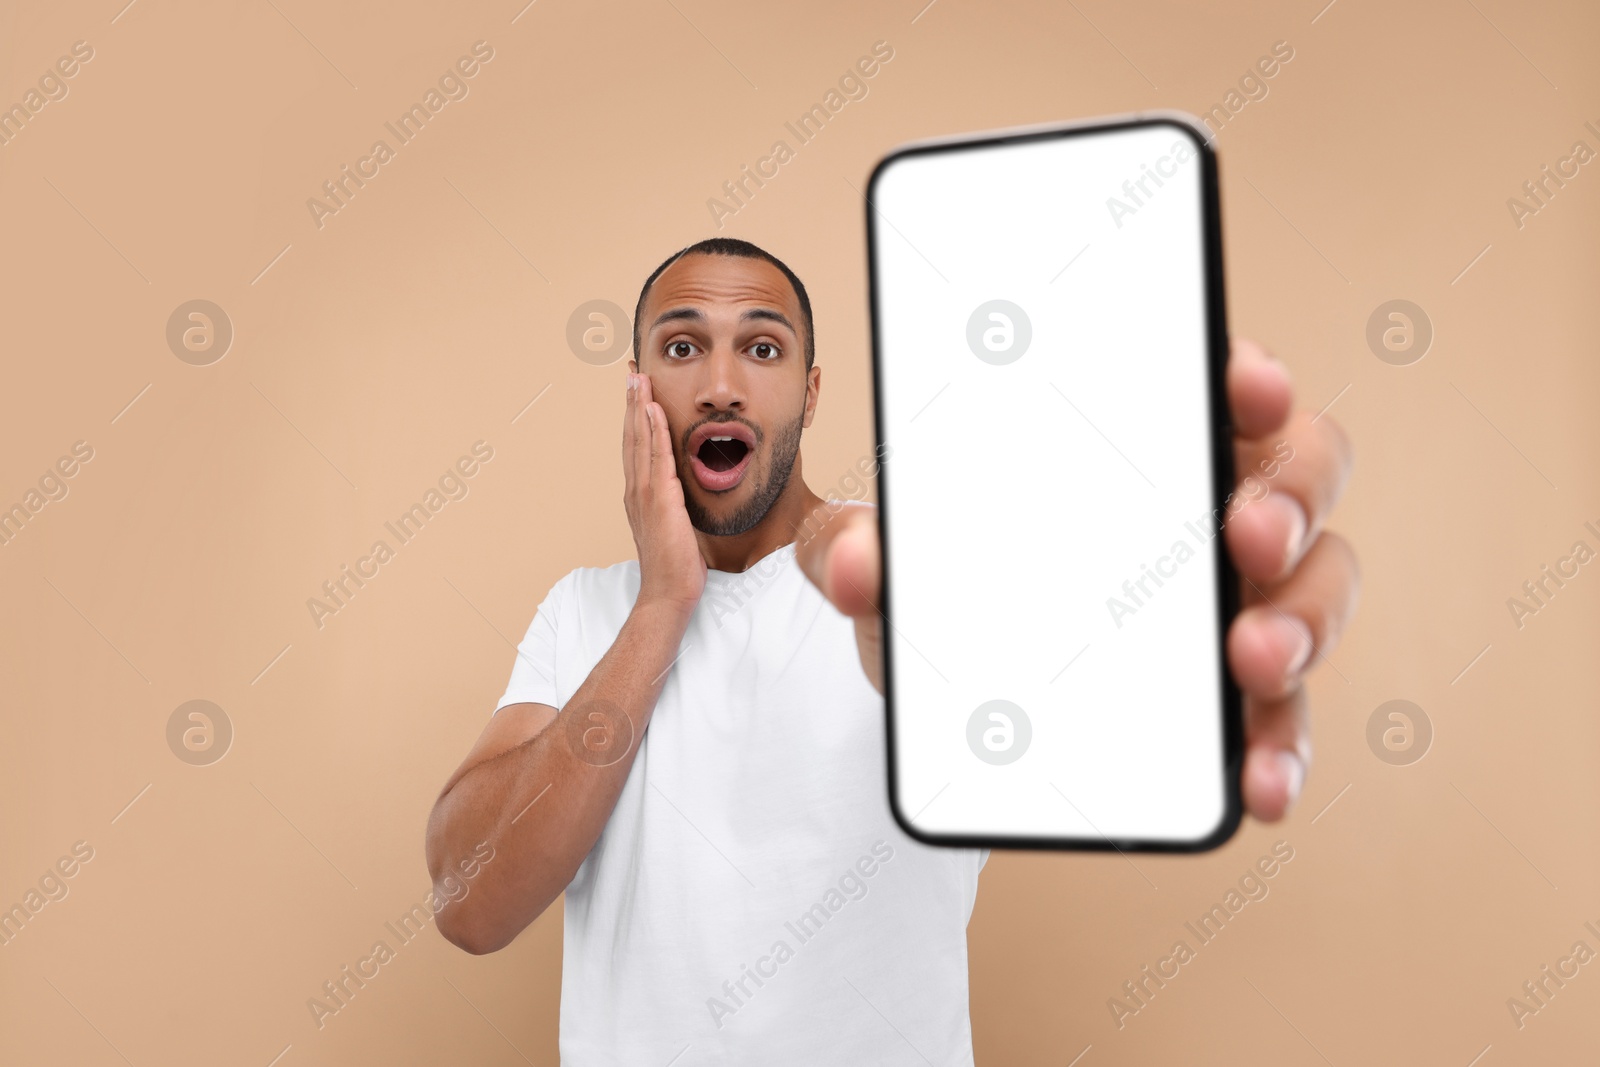 Photo of Surprised man showing smartphone in hand on beige background